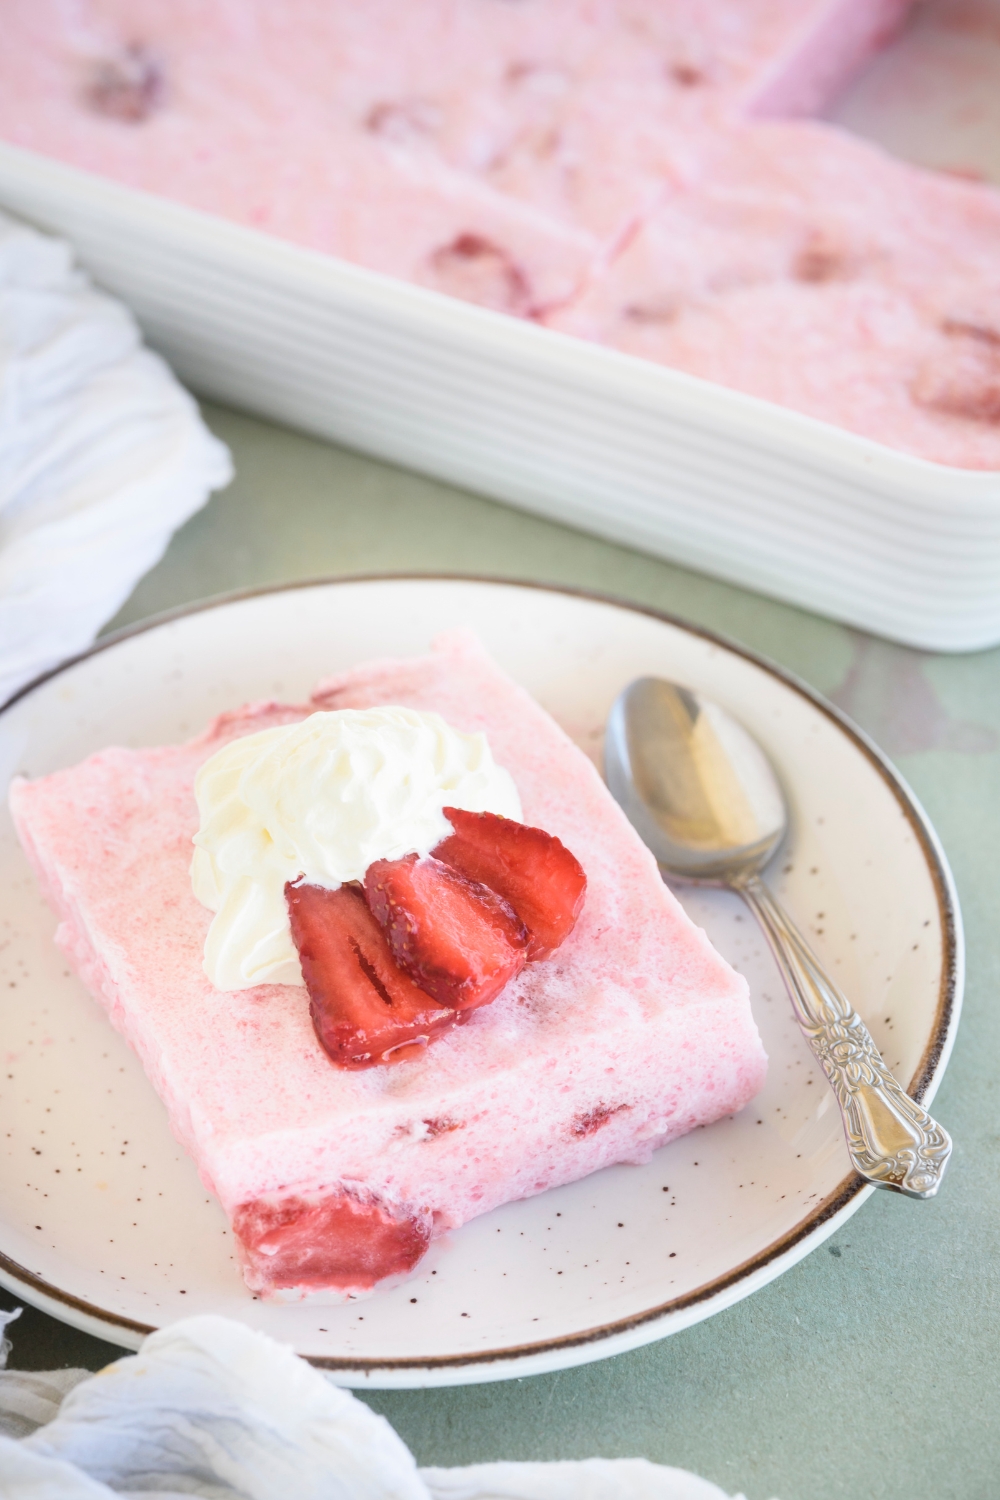 A square serving of strawberry Jello fruit salad with a dollop of whipped cream and three strawberry slices on top. There is a spoon on the plate.